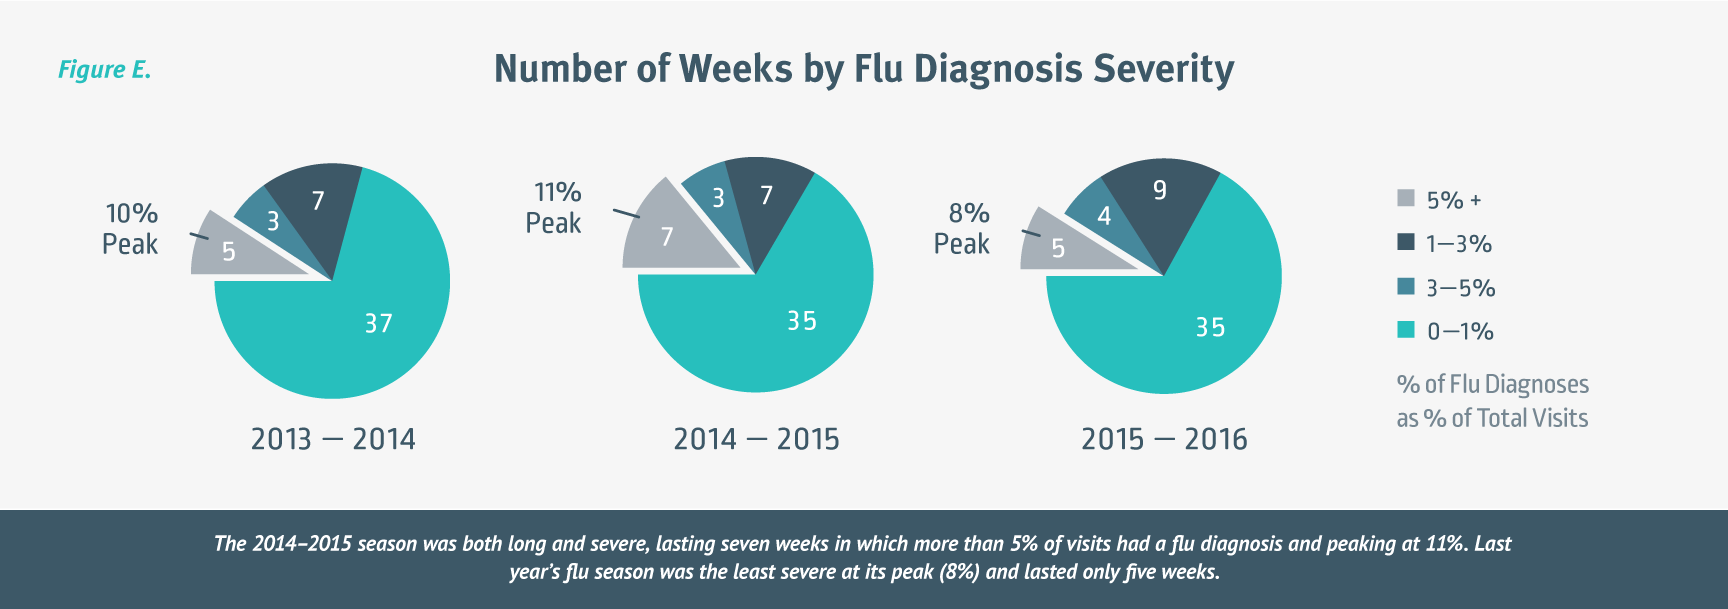 Number of Weeks by Flu Diagnosis Severity - Chart